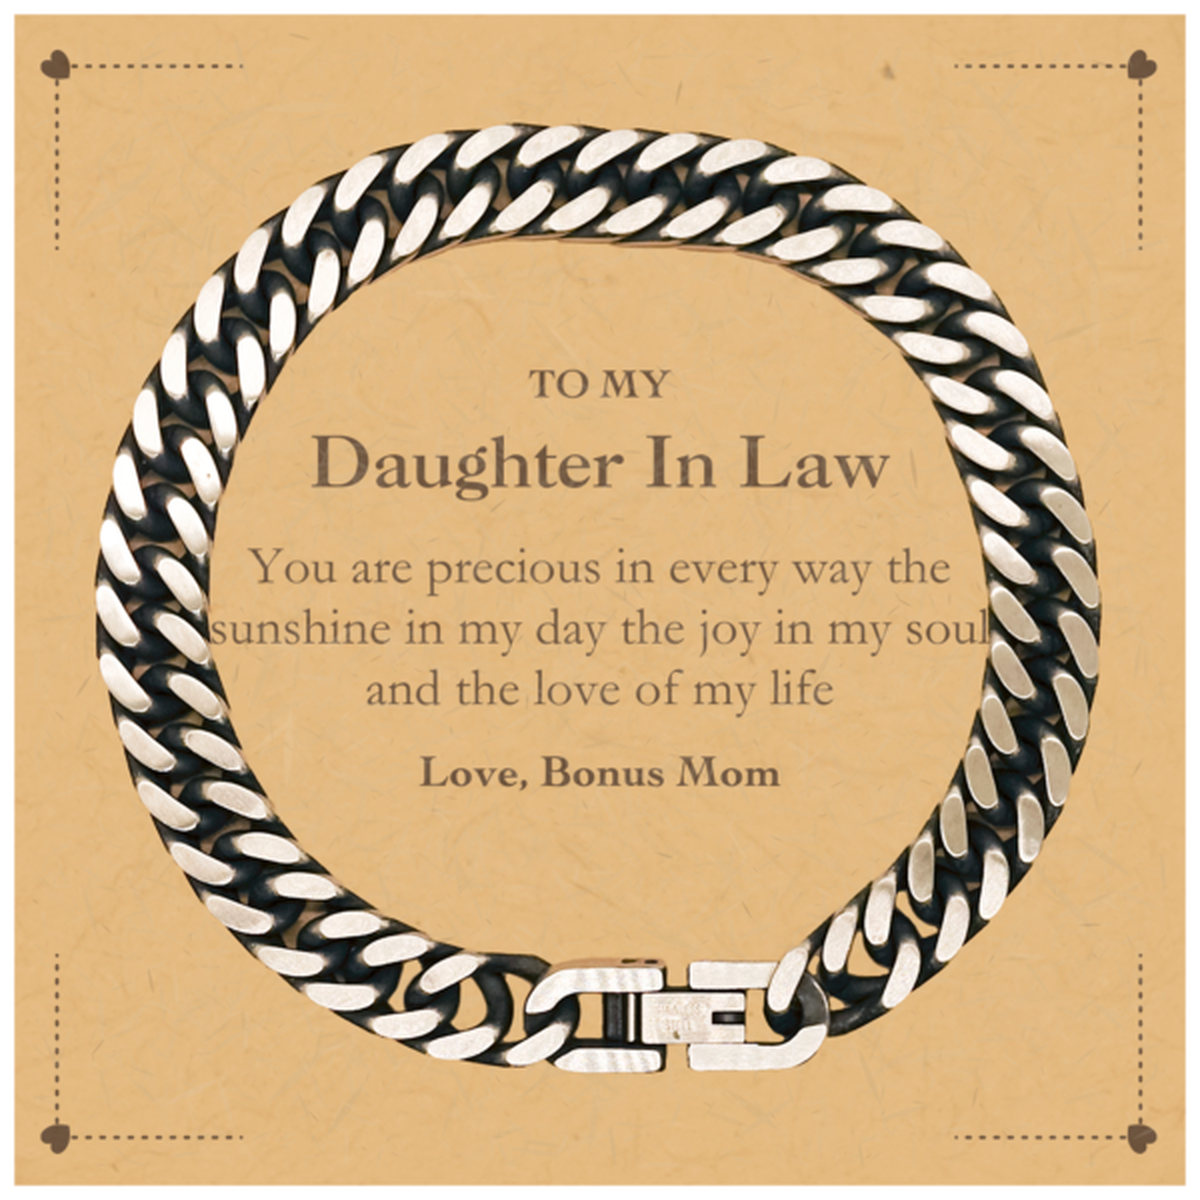 Graduation Gifts for Daughter In Law Cuban Link Chain Bracelet Present from Bonus Mom, Christmas Daughter In Law Birthday Gifts Daughter In Law You are precious in every way the sunshine in my day. Love, Bonus Mom